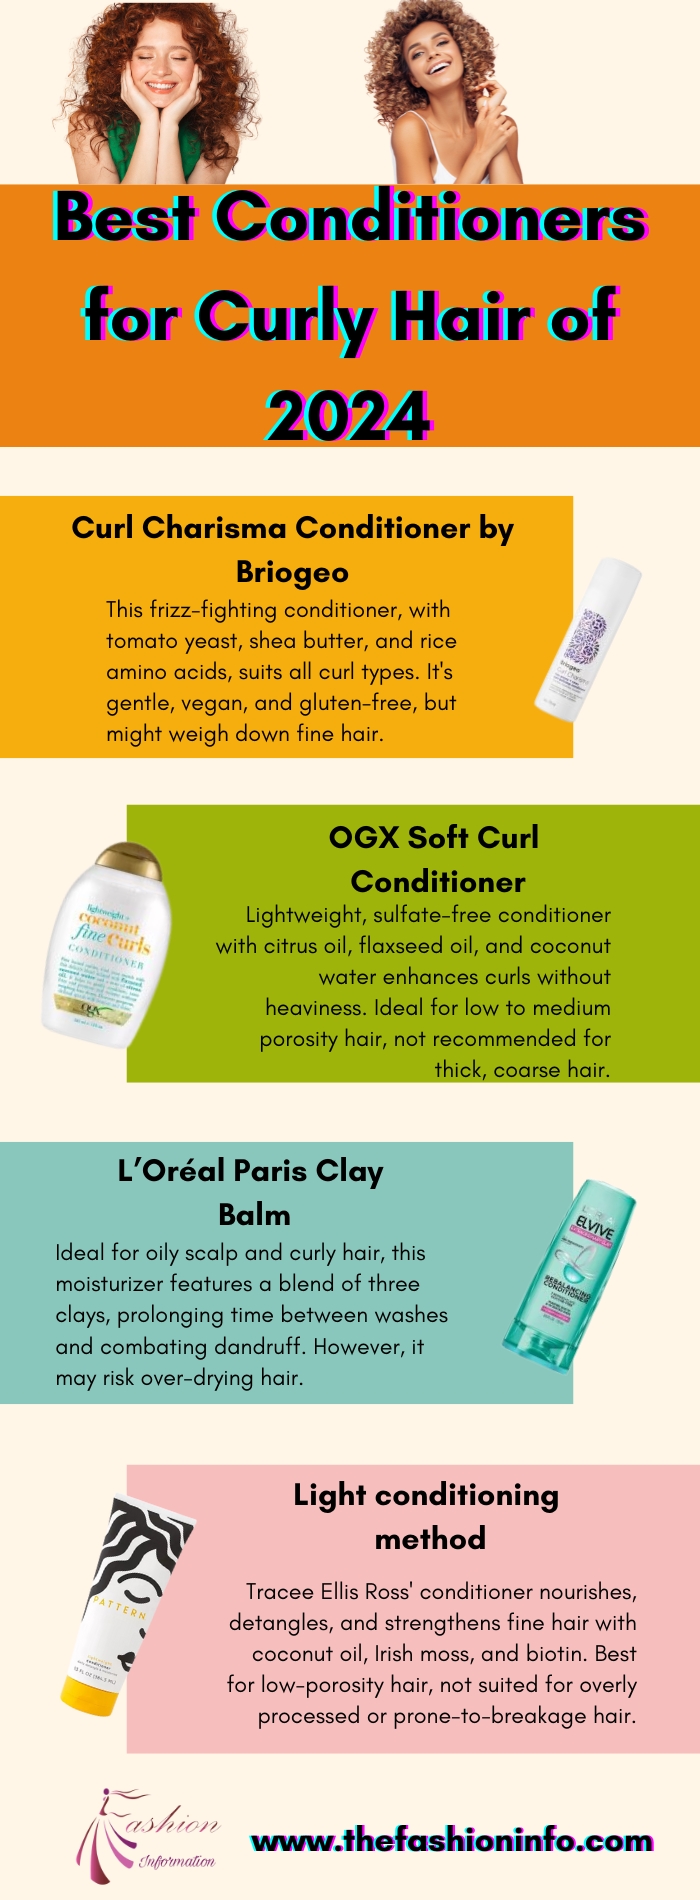 Best Conditioners for Curly Hair of 2024